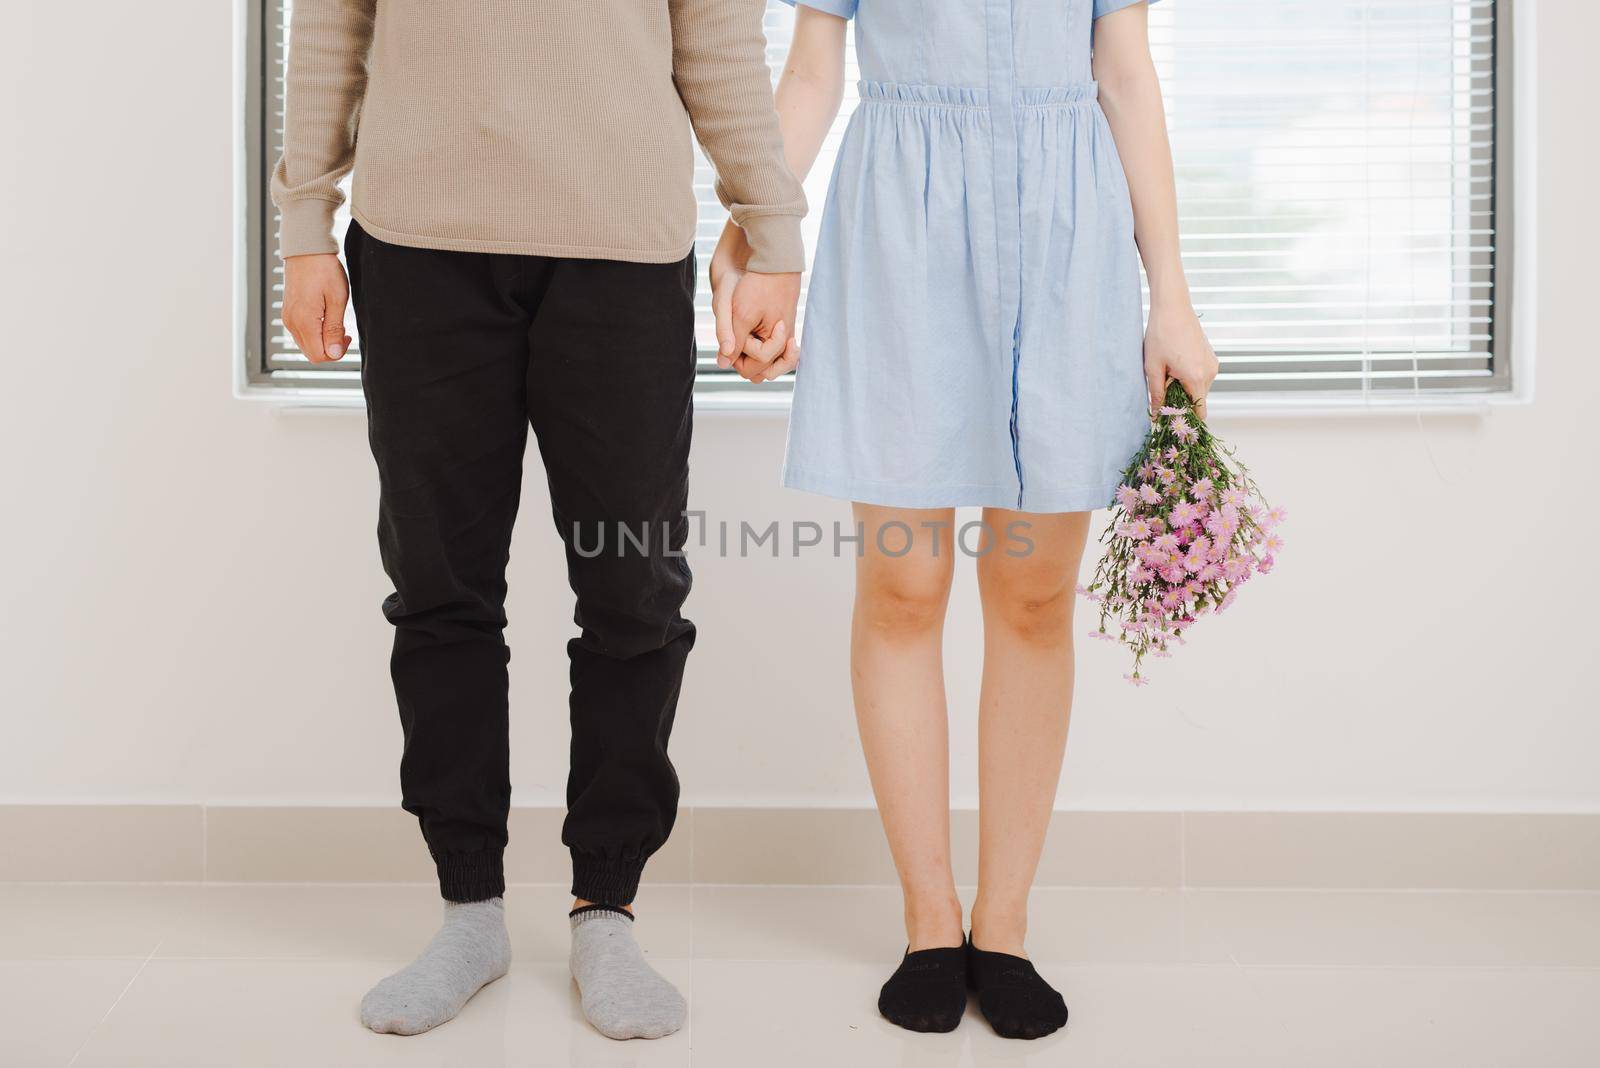 Couple in love. Young couple standing together